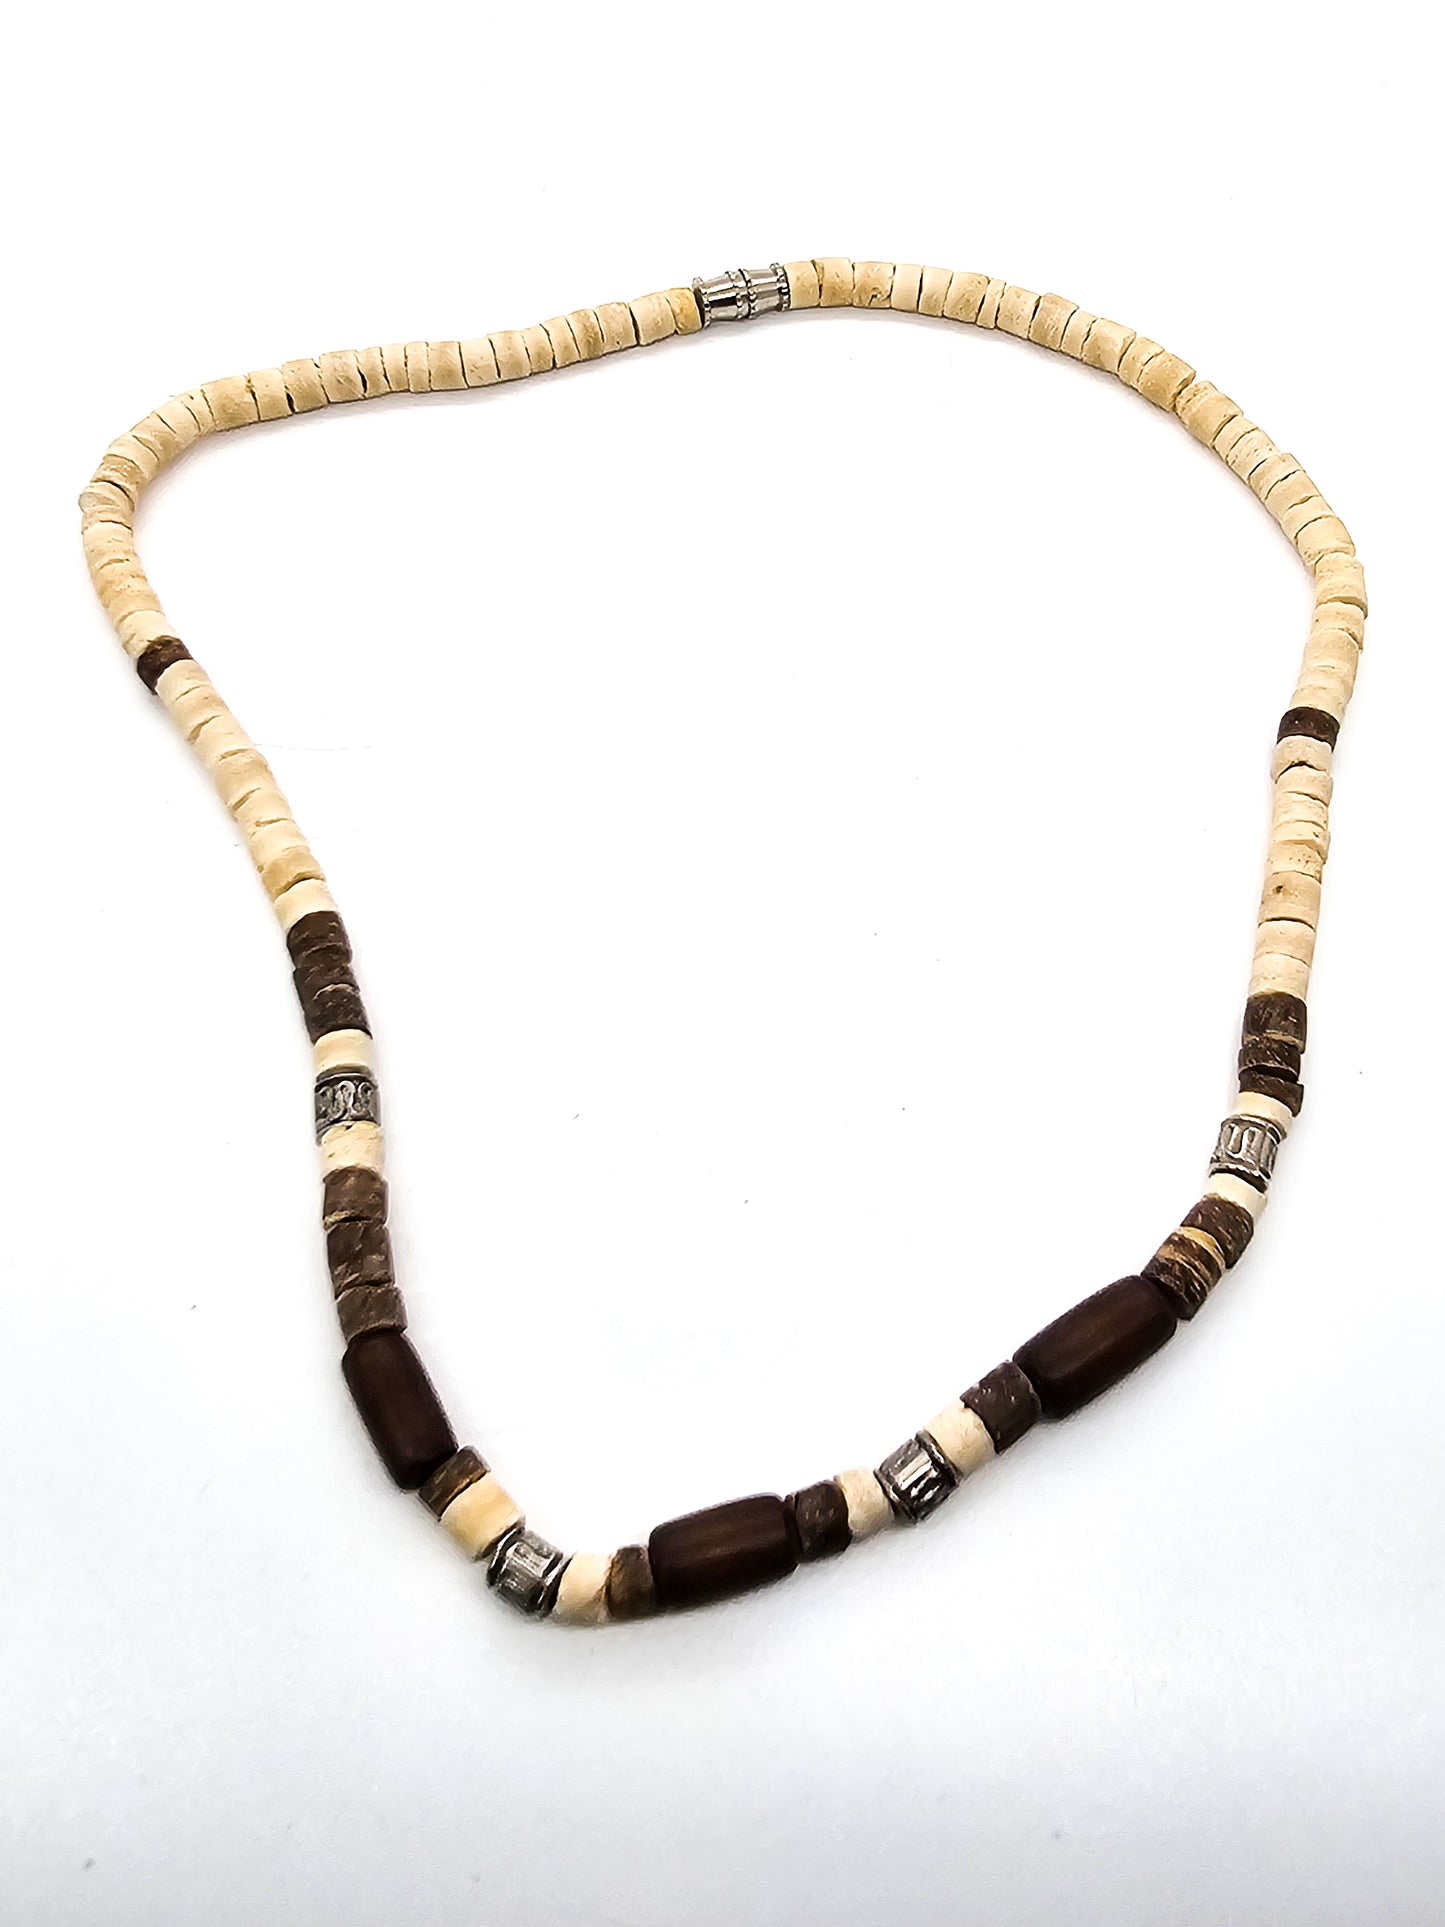 Heishi beaded coconut shell surfer hippy style retro 90's vintage necklace 16 inches